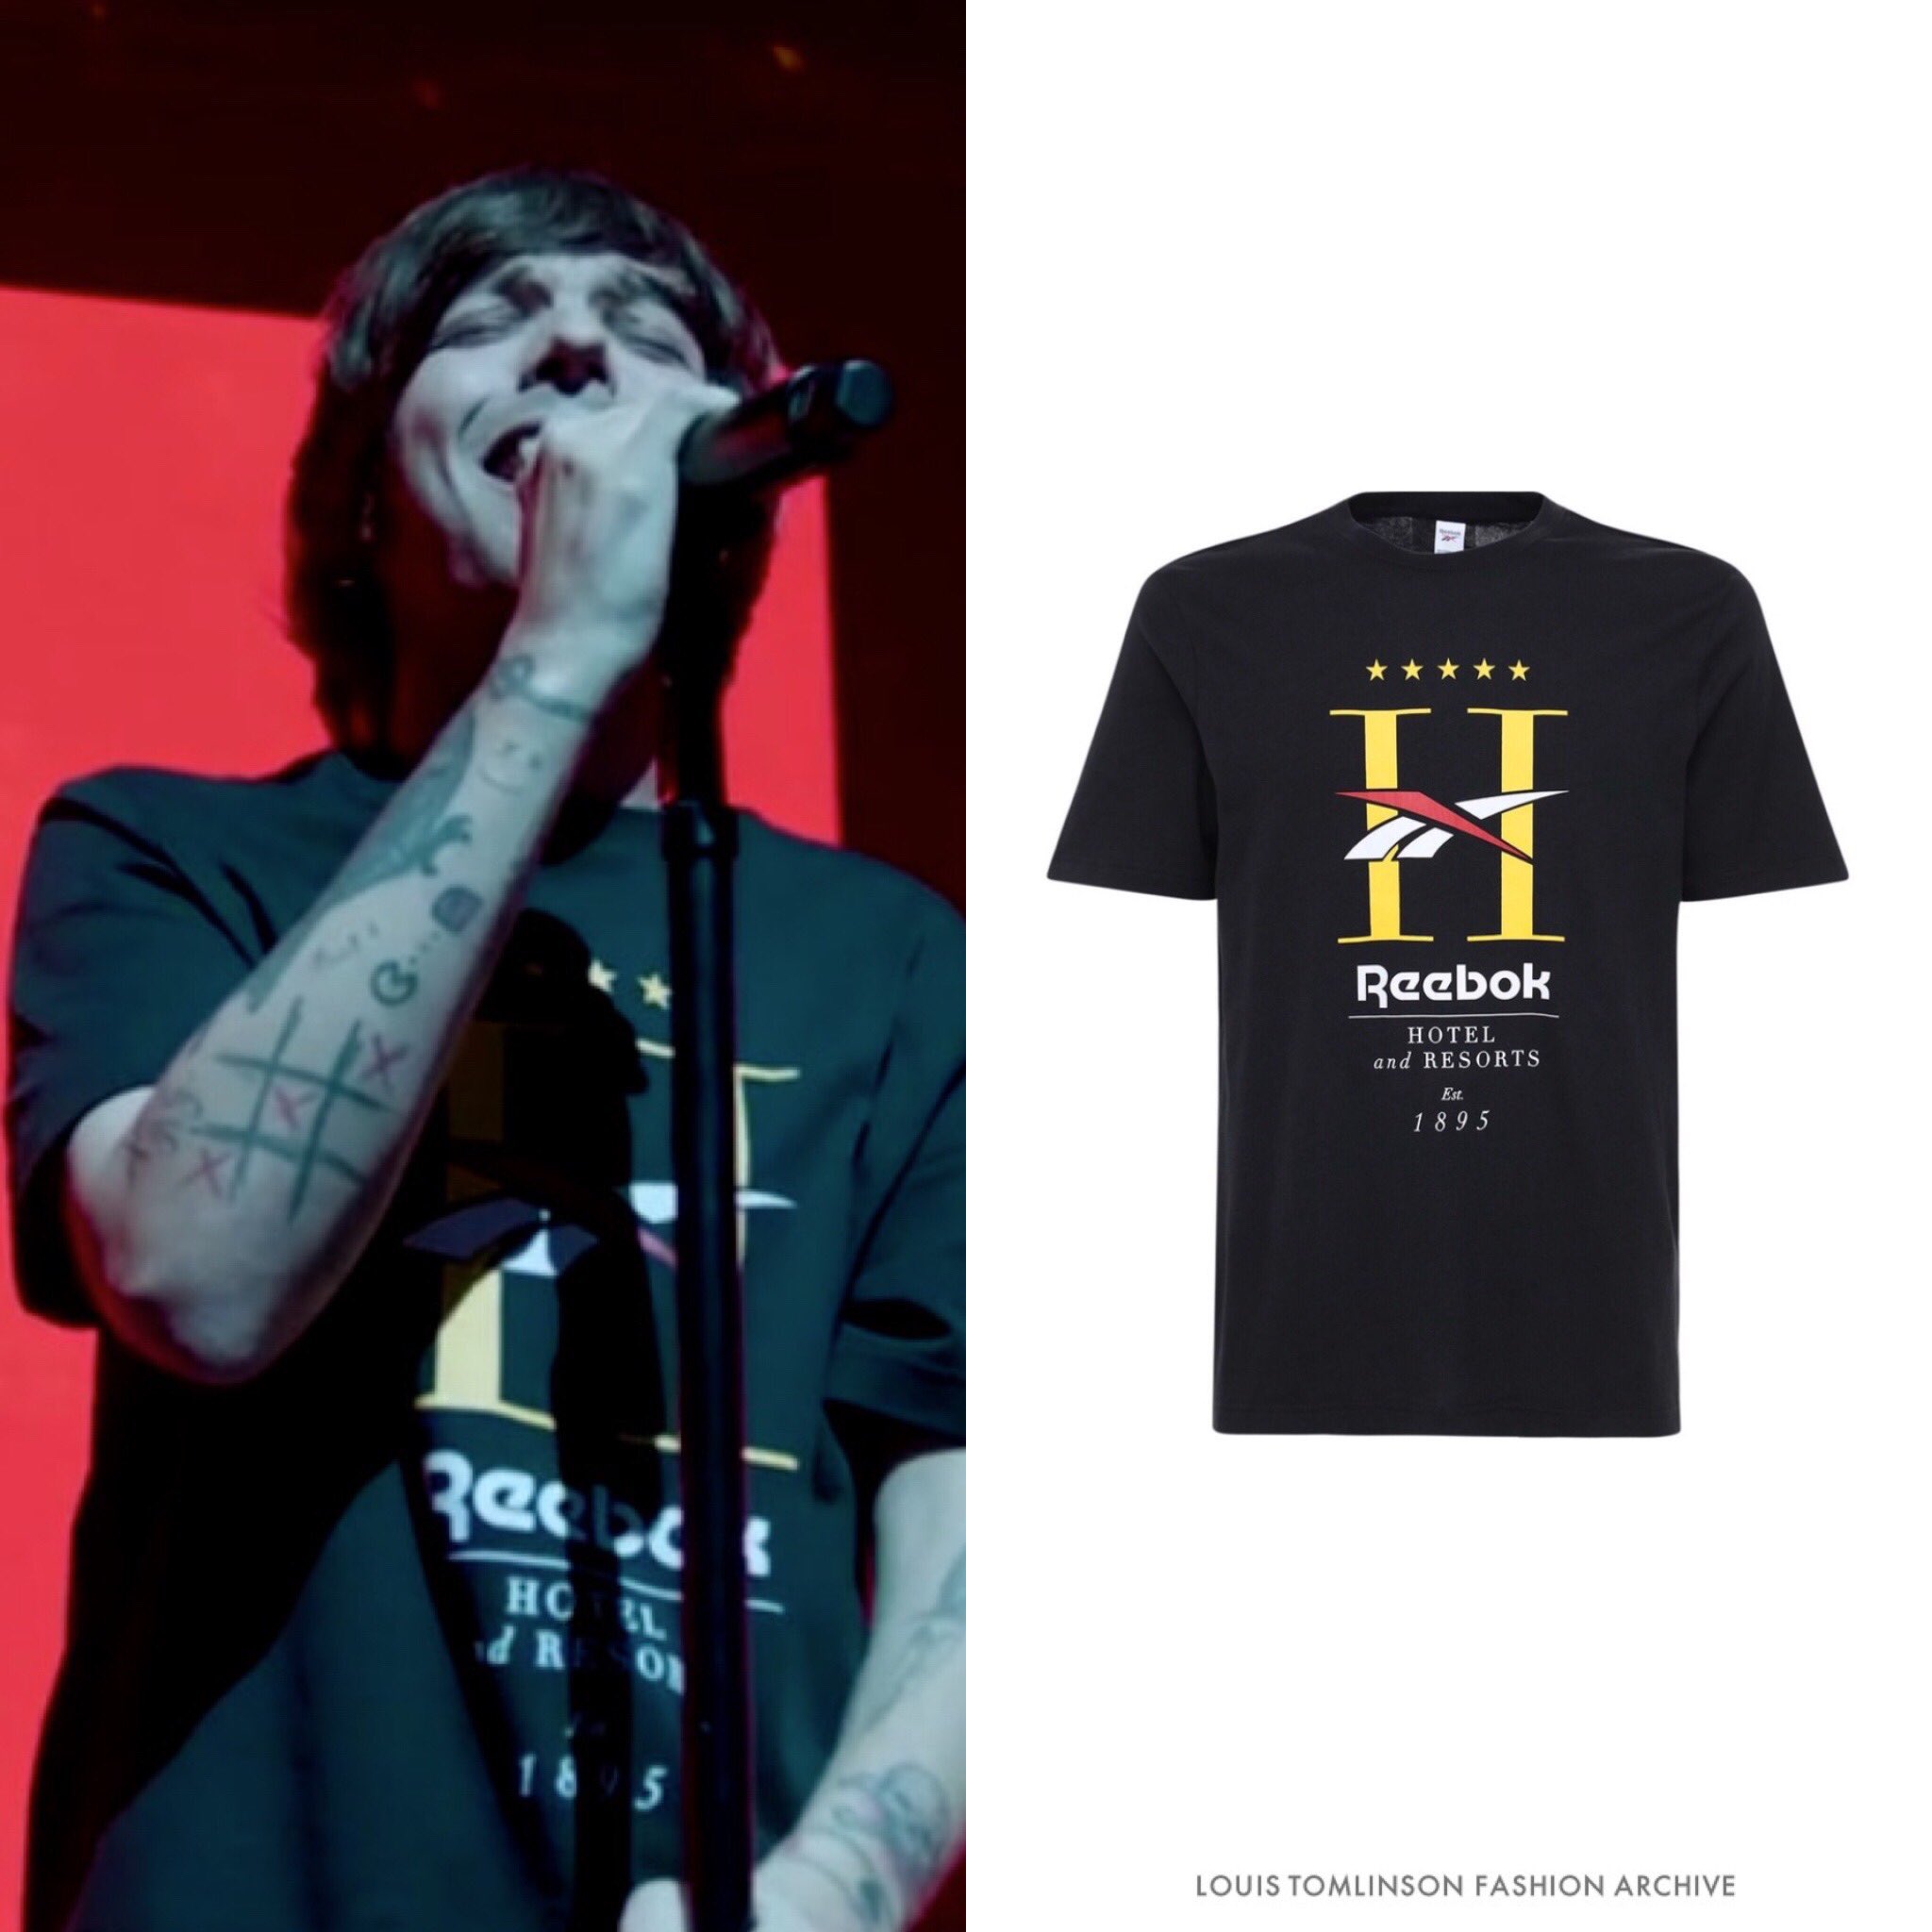 Louis Tomlinson Fashion Archive on X: Louis wore a